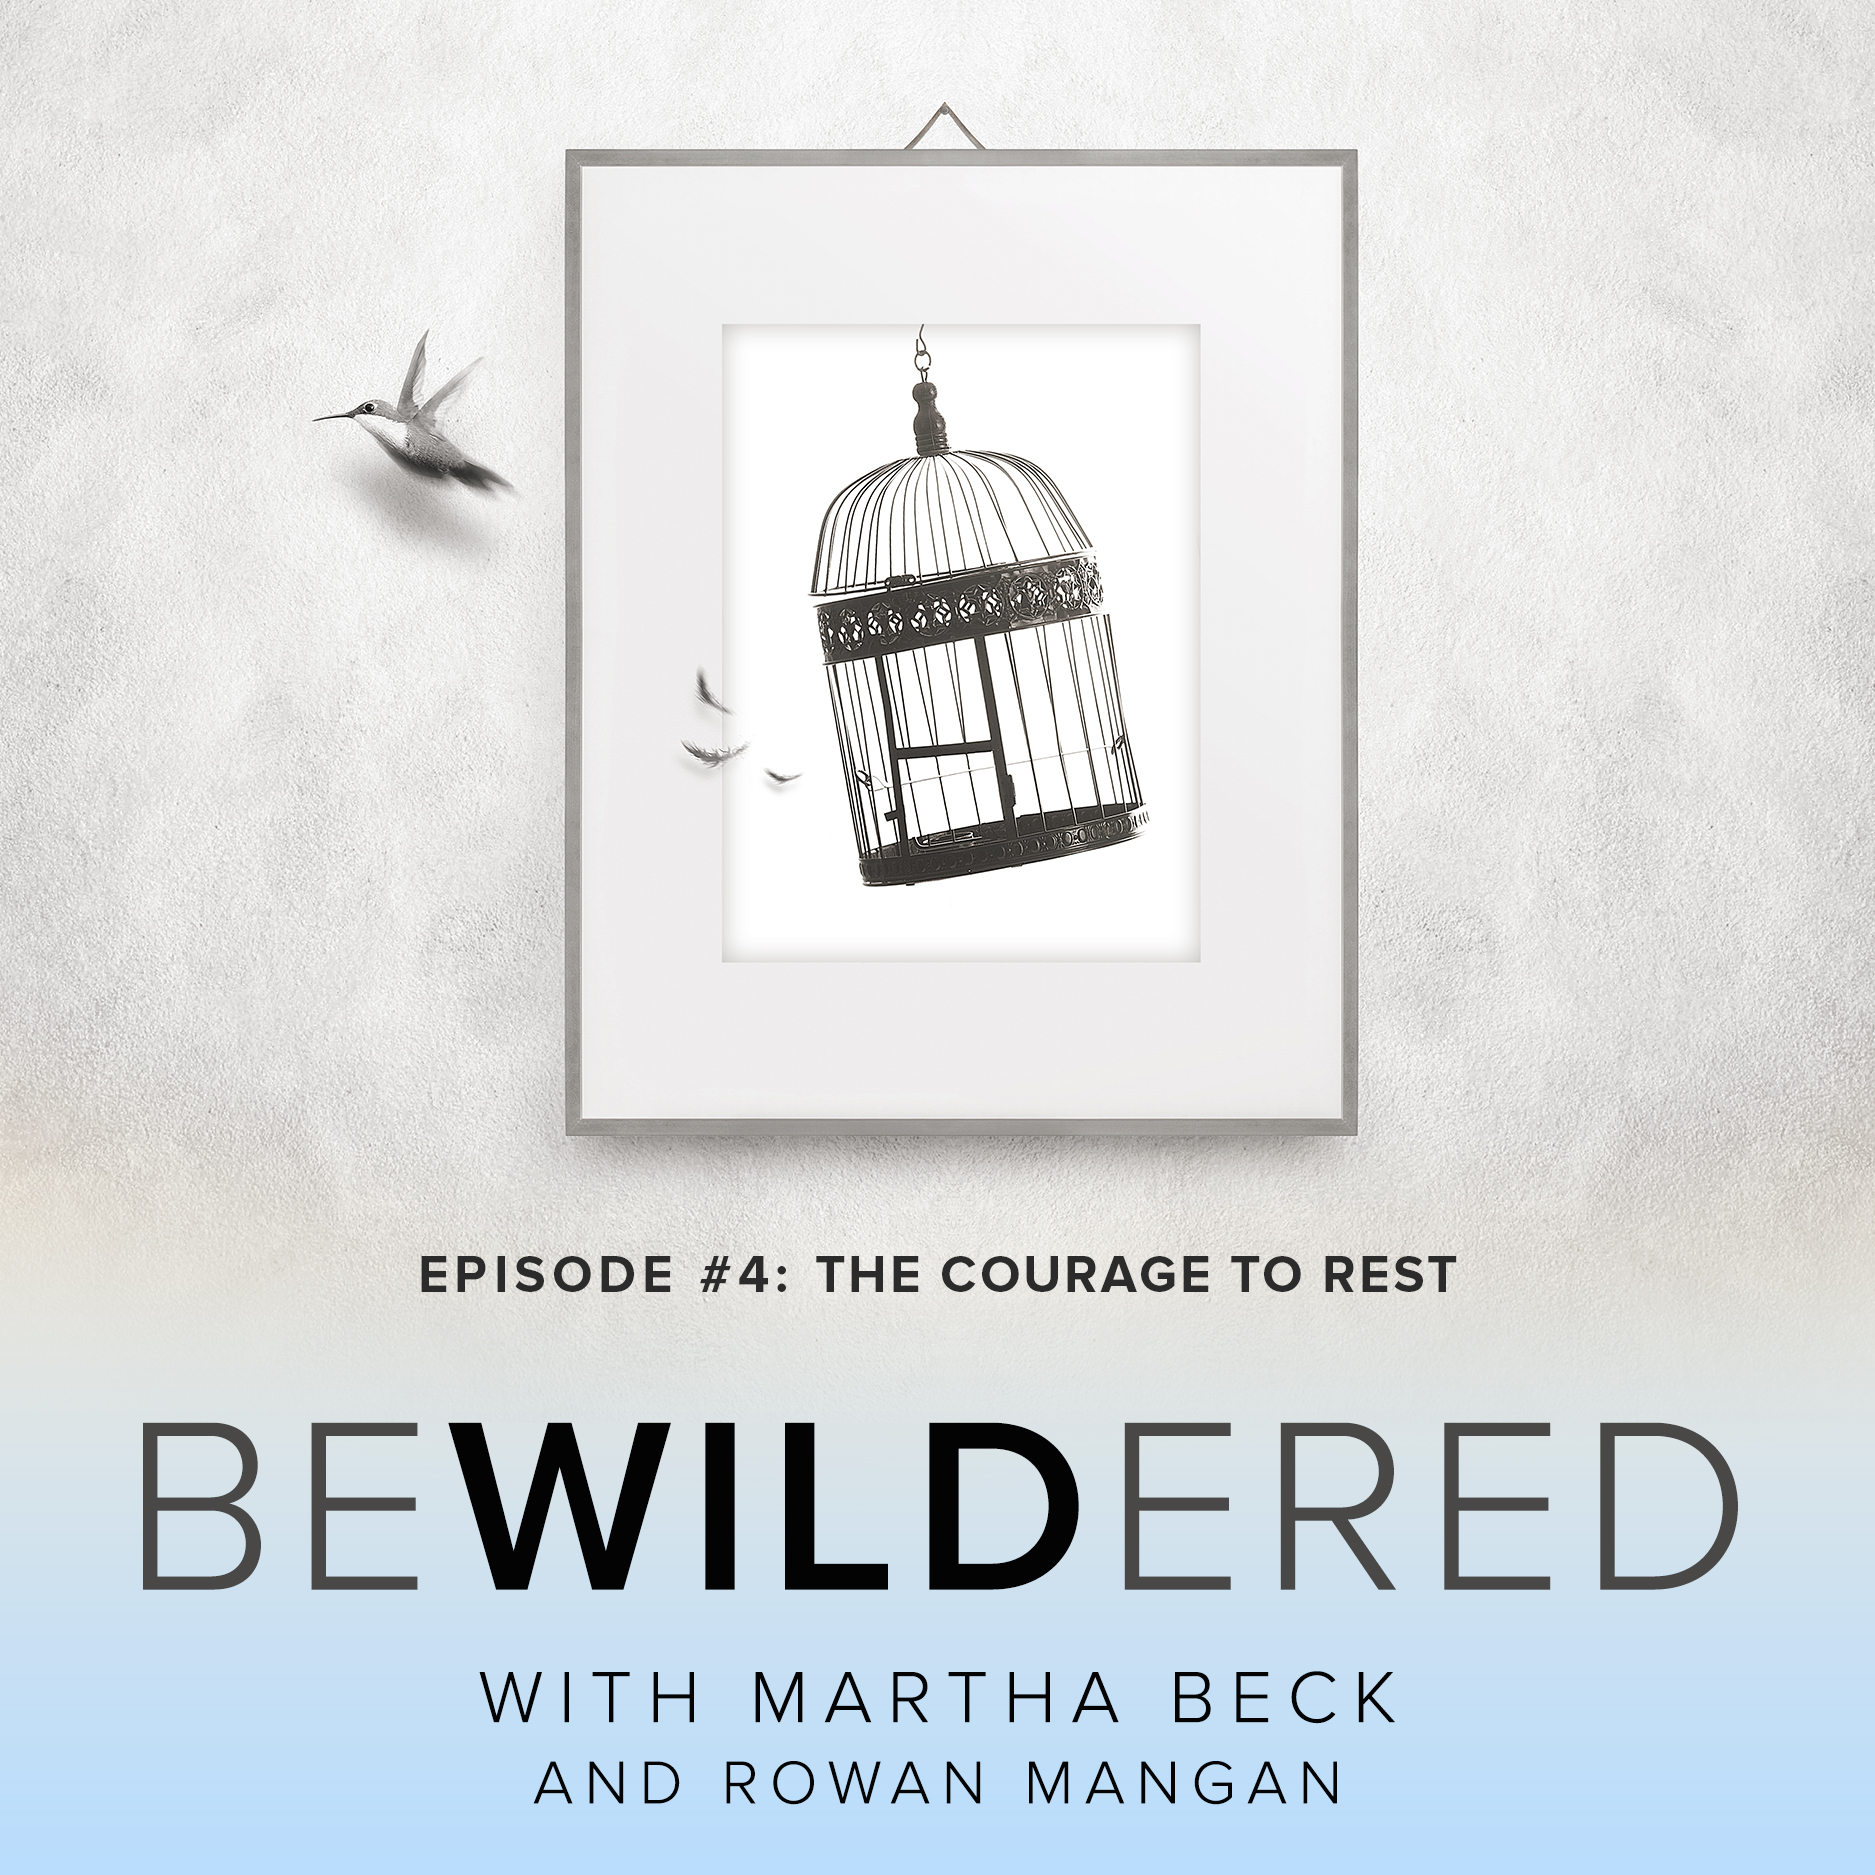 Image for Episode #4 The Courage to Rest for the Bewildered Podcast with Martha Beck and Rowan Mangan